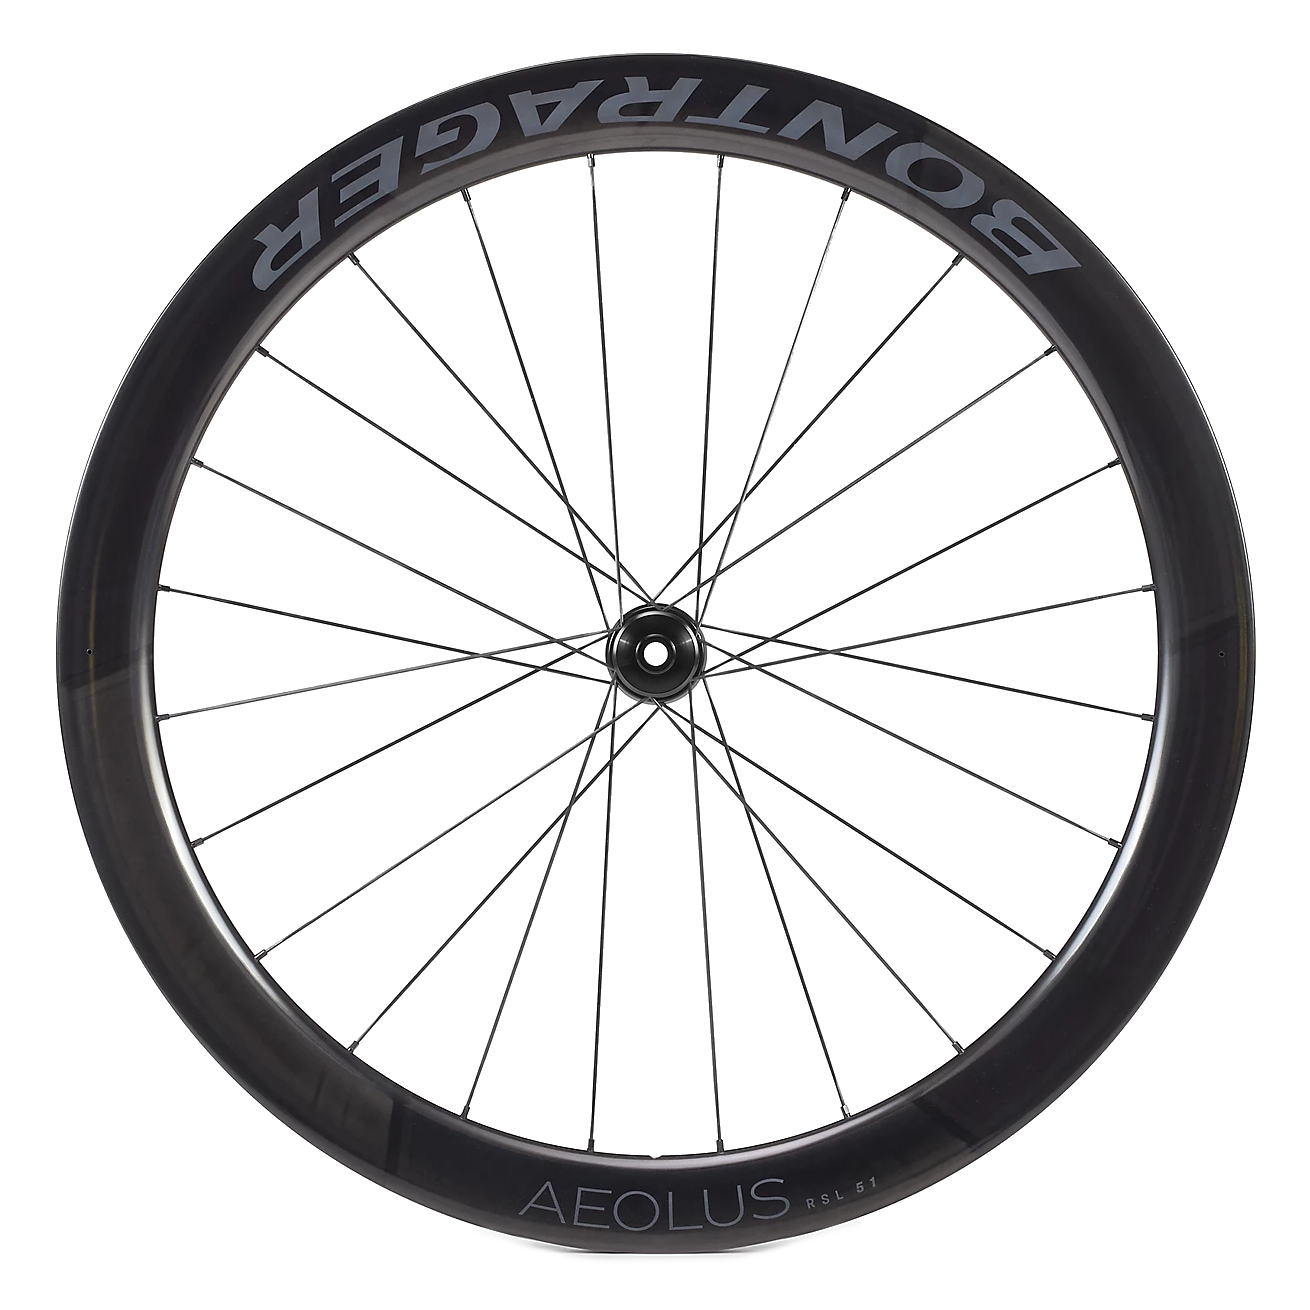 Picture of Bontrager Aeolus RSL 51 TLR Disc Carbon Front Wheel - Clincher / Tubeless - Centerlock - 12x100mm